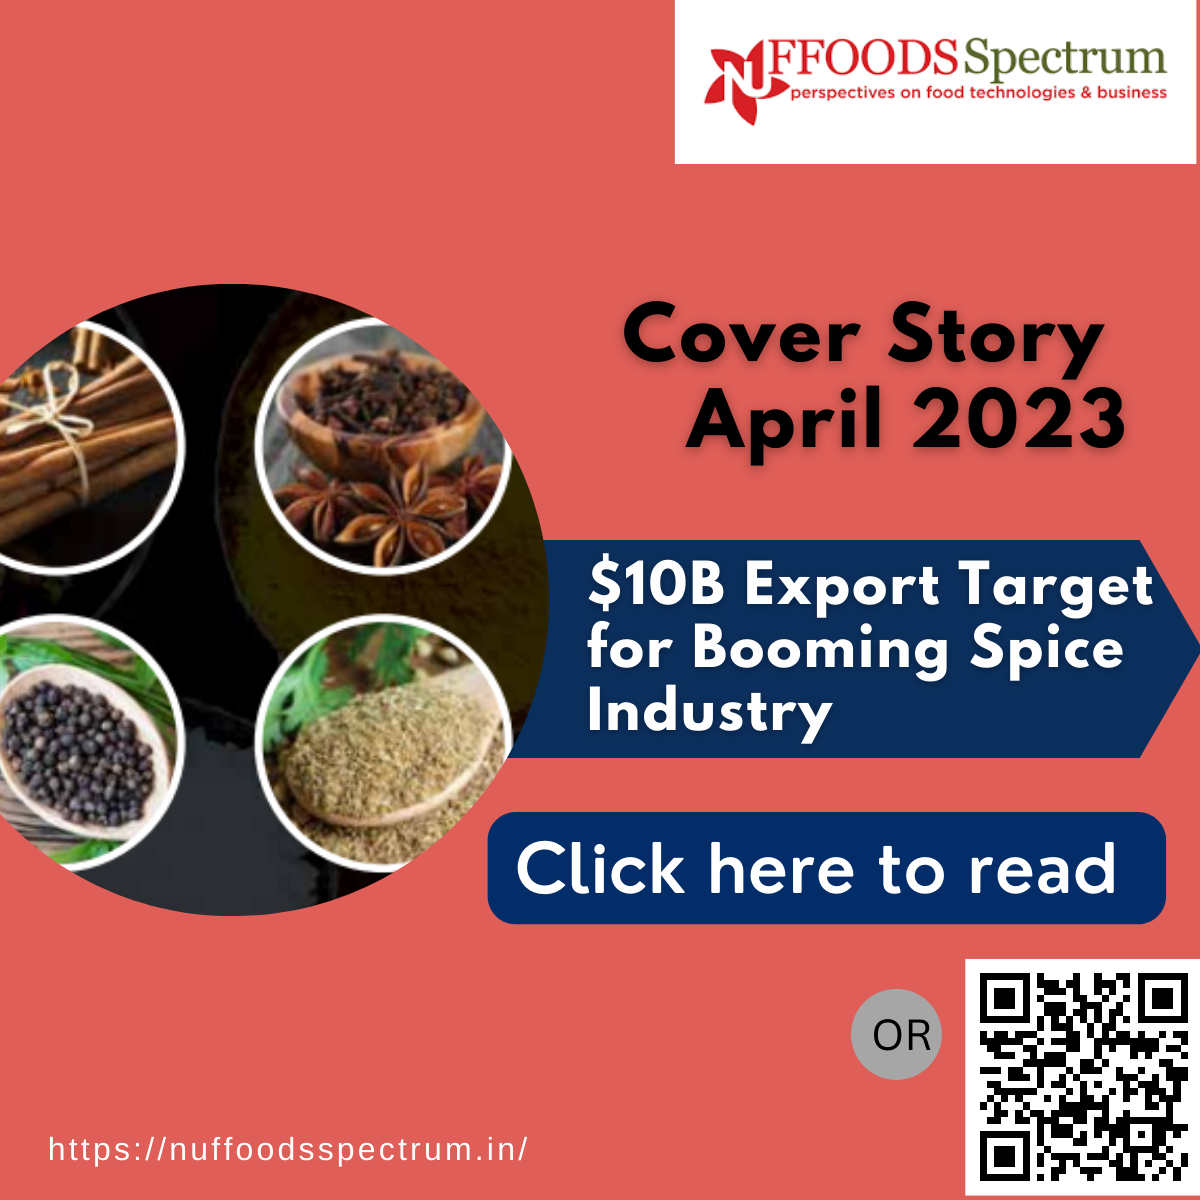 $10 B Export Target for Booming Spice Industry